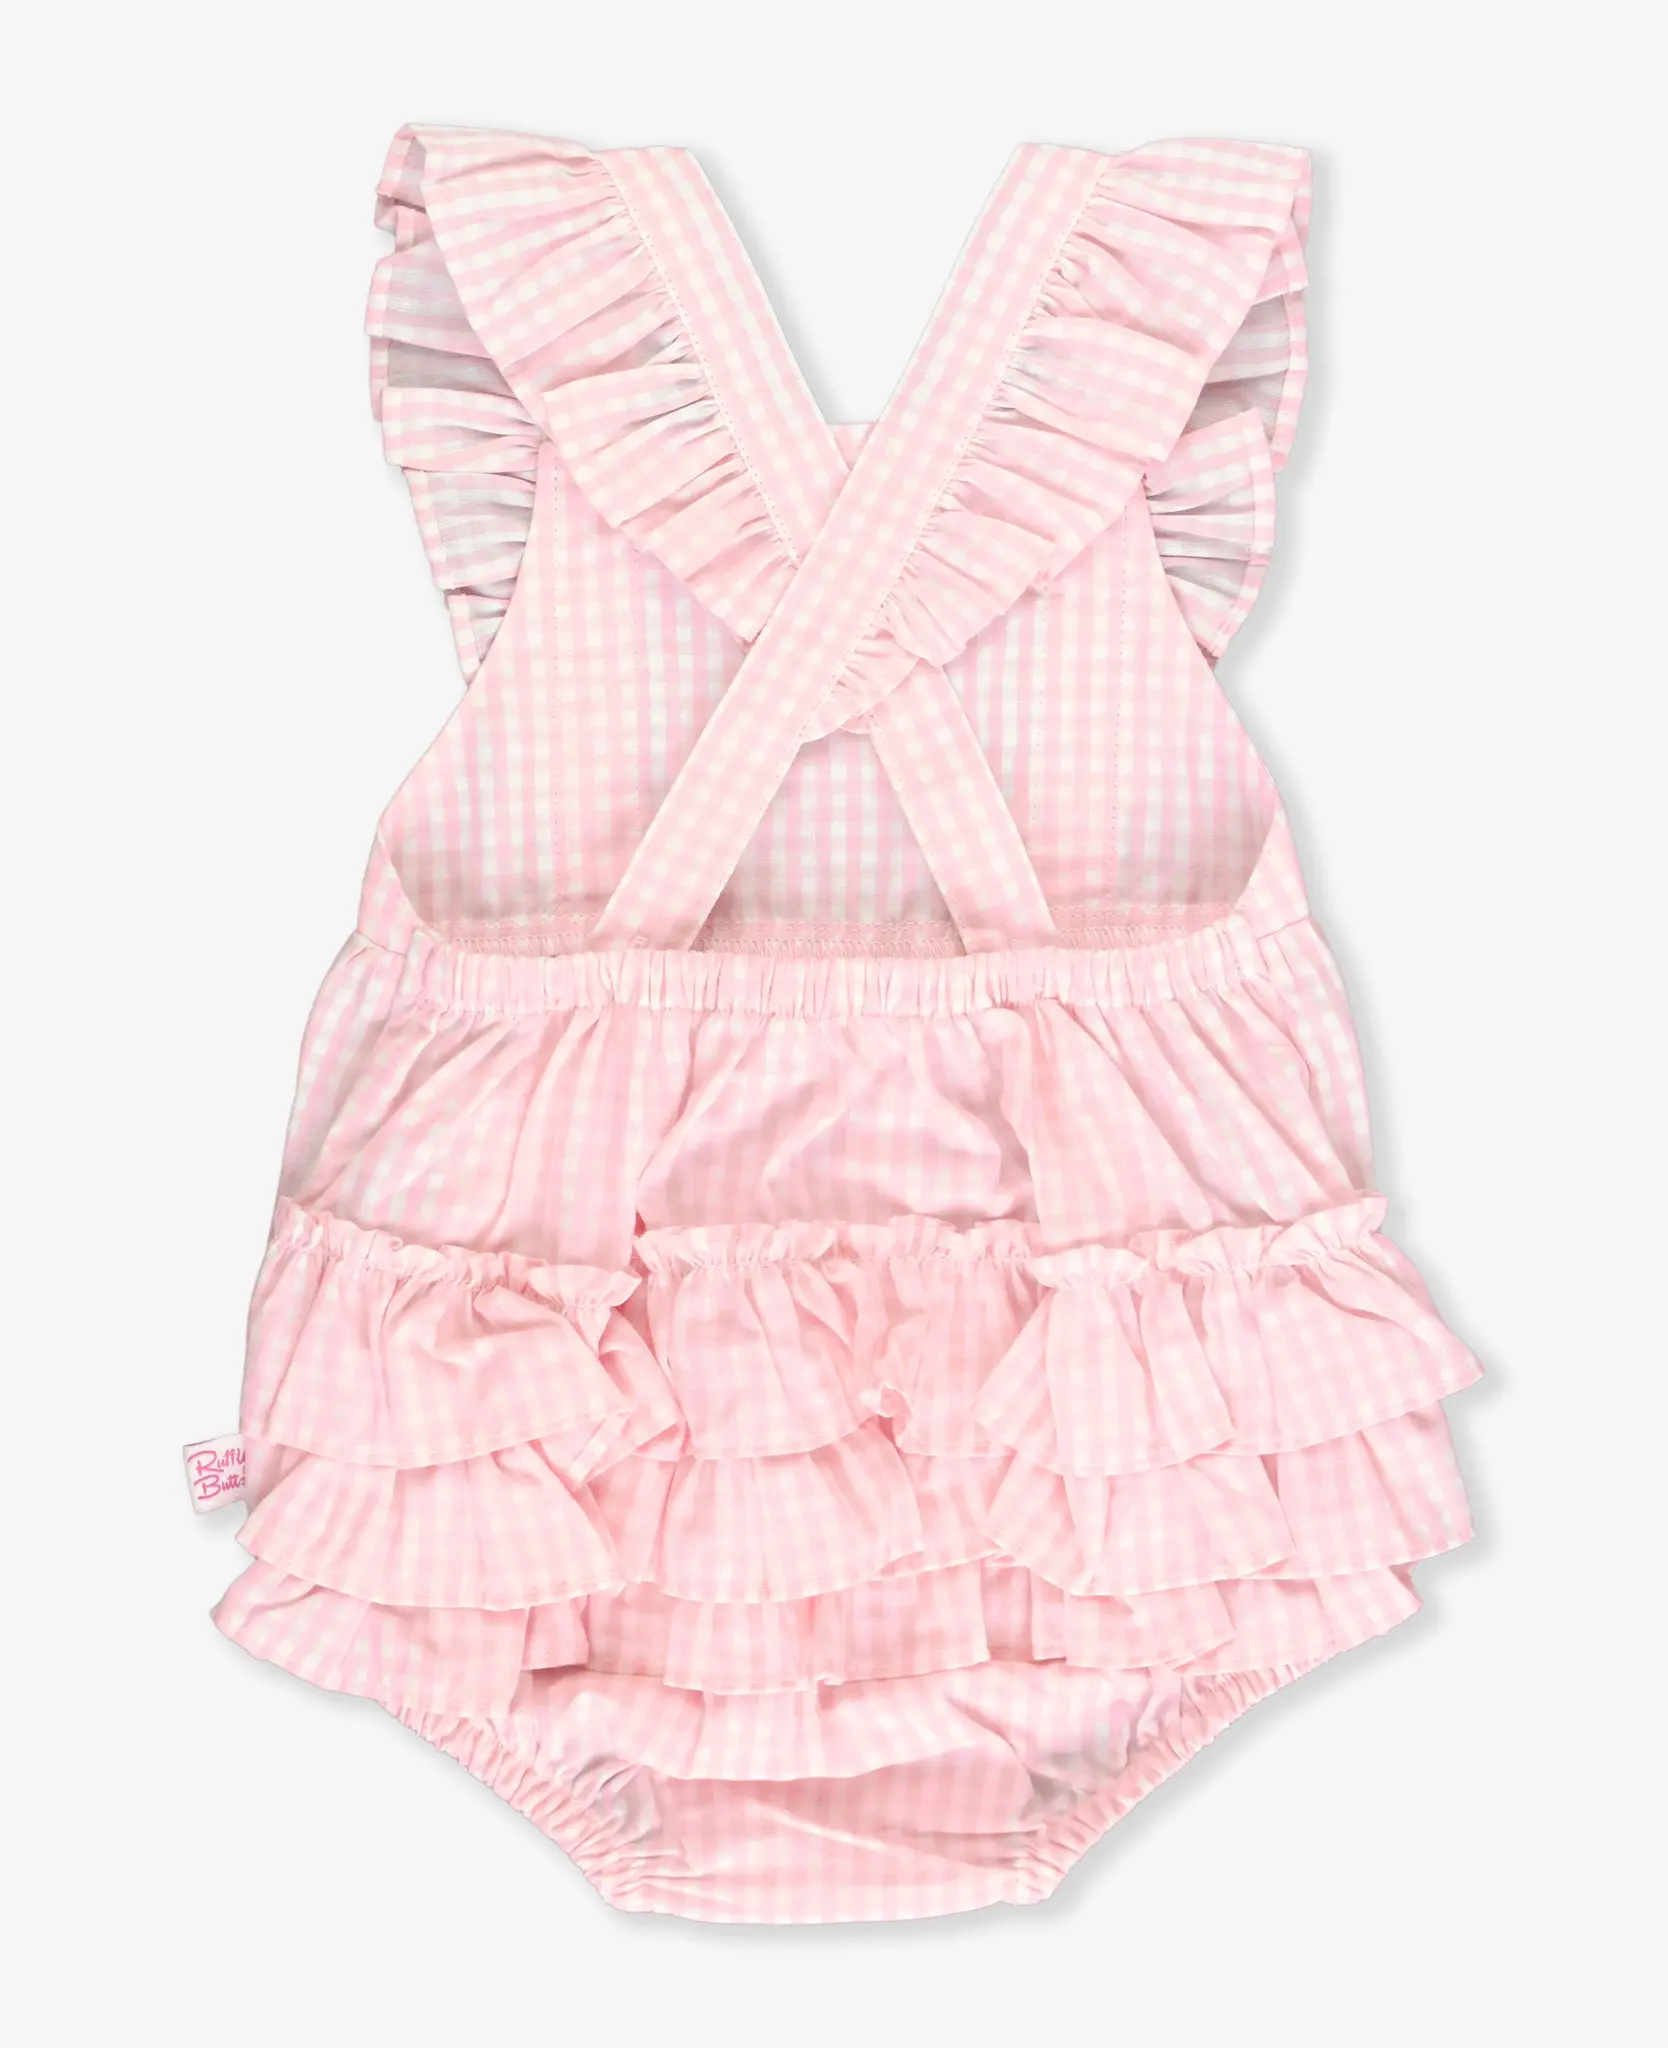 Ruffle Butts/Rugged Butts Pinafore Cross-Back Woven Romper Pink Gingham